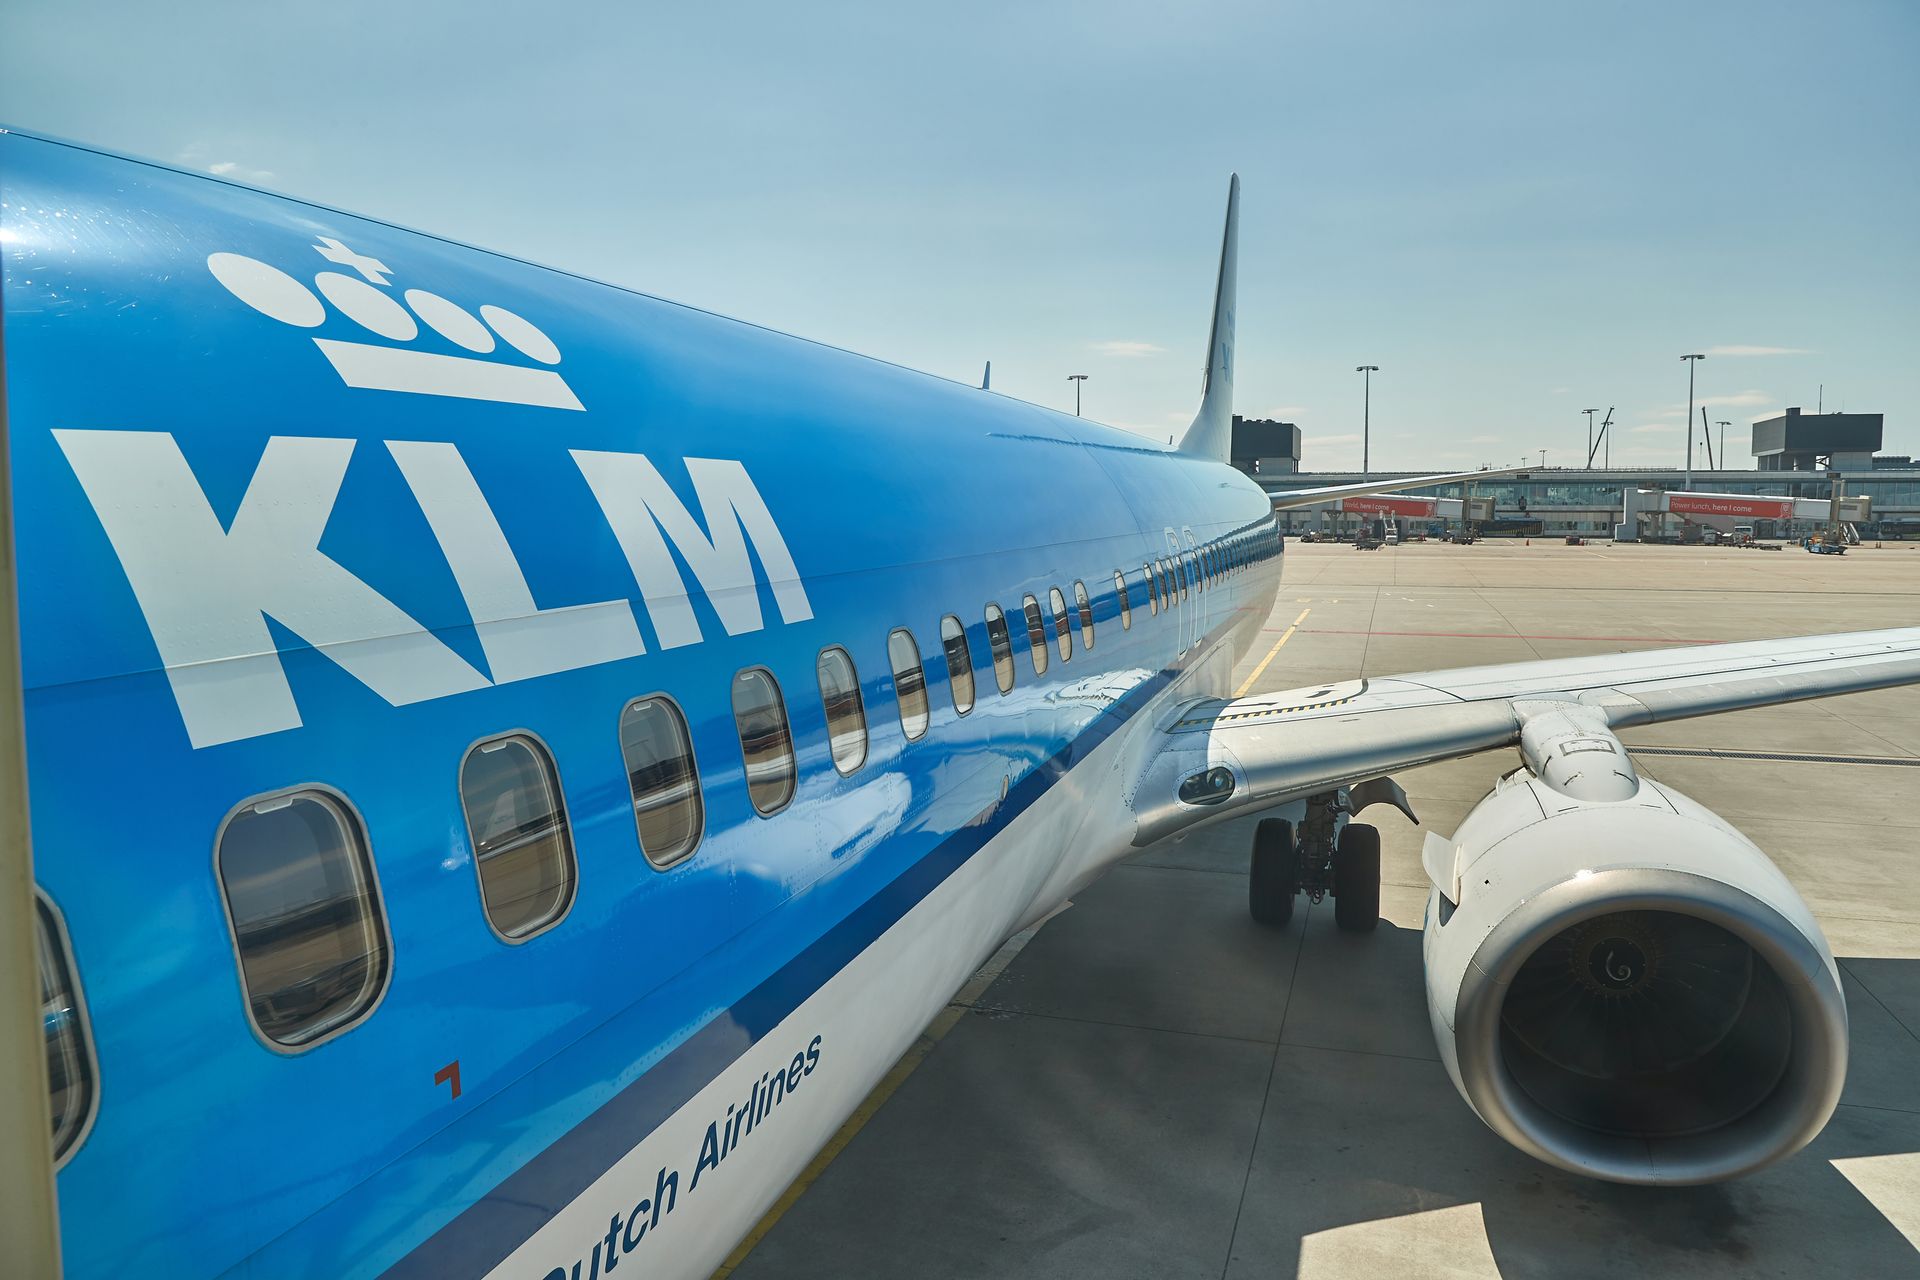 A blue klm airplane is parked on the tarmac